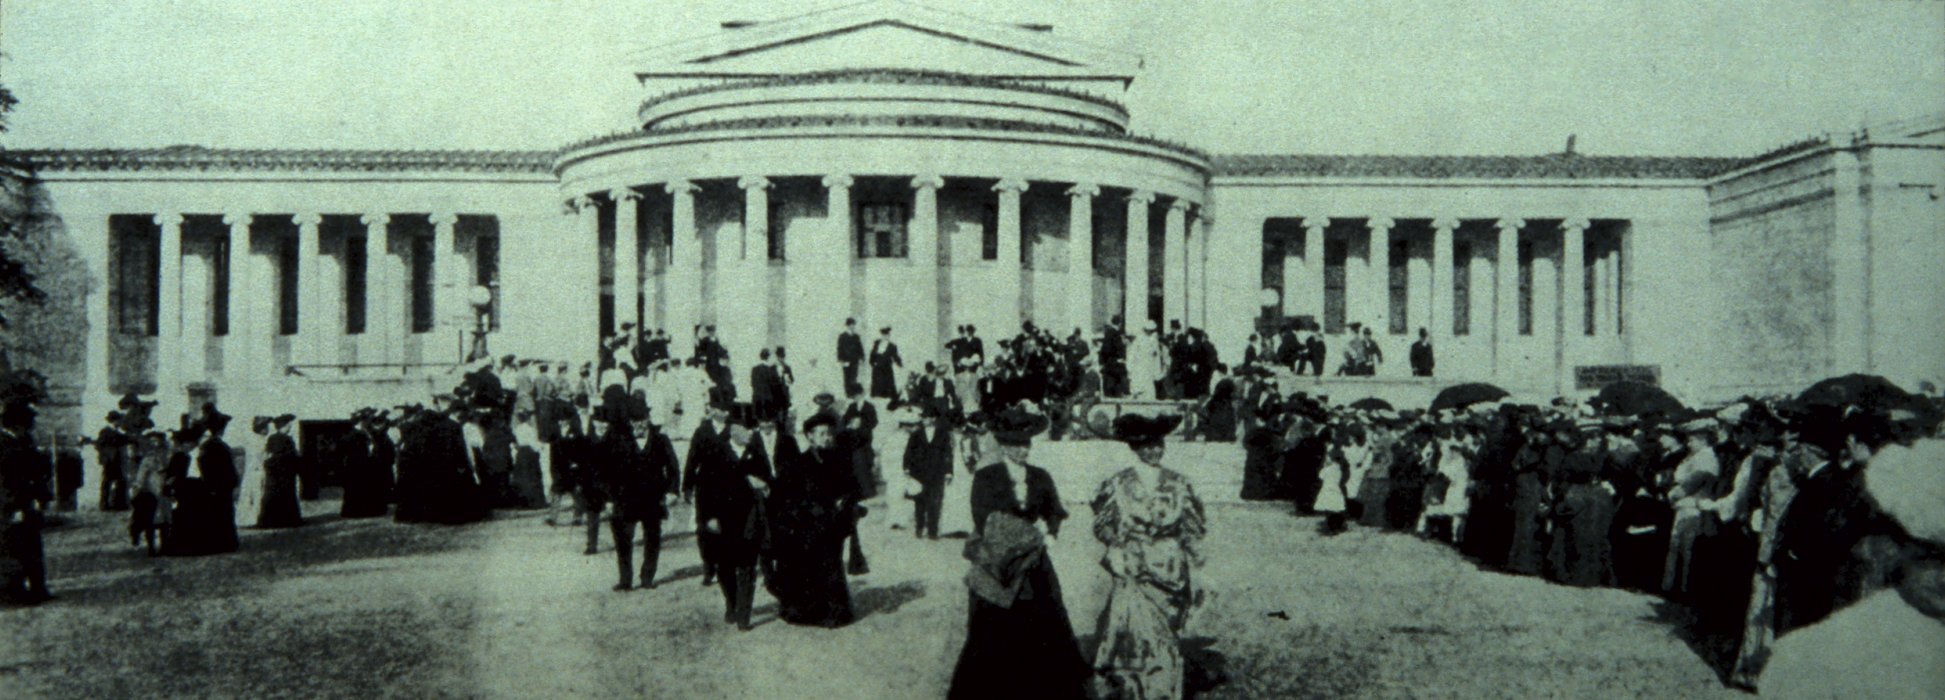 People entering and leaving the Albright Art Gallery, May 31, 1905